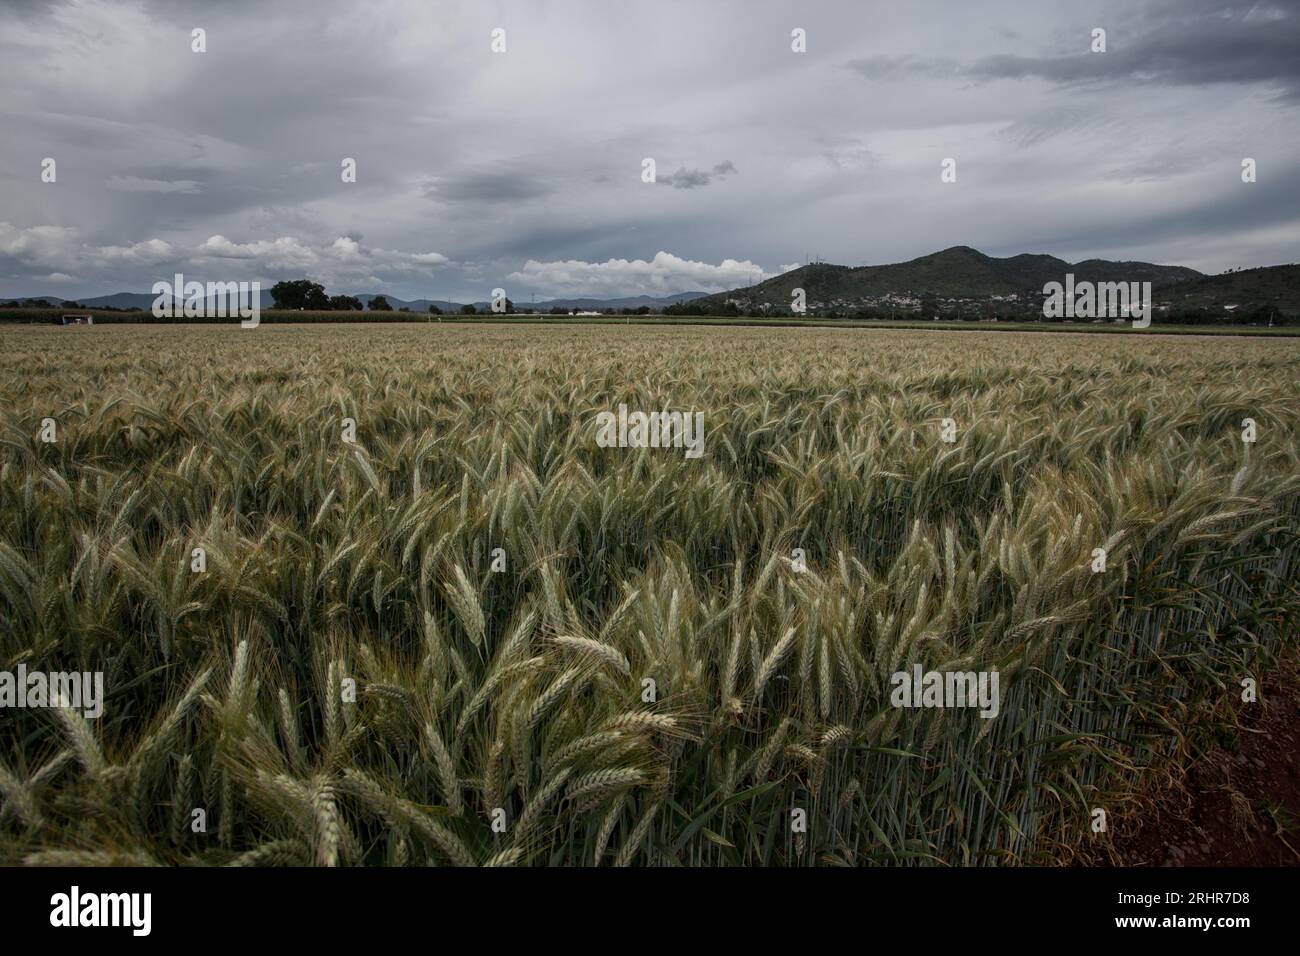 Healthy wheat plants in a wheat field in Mexico Stock Photo